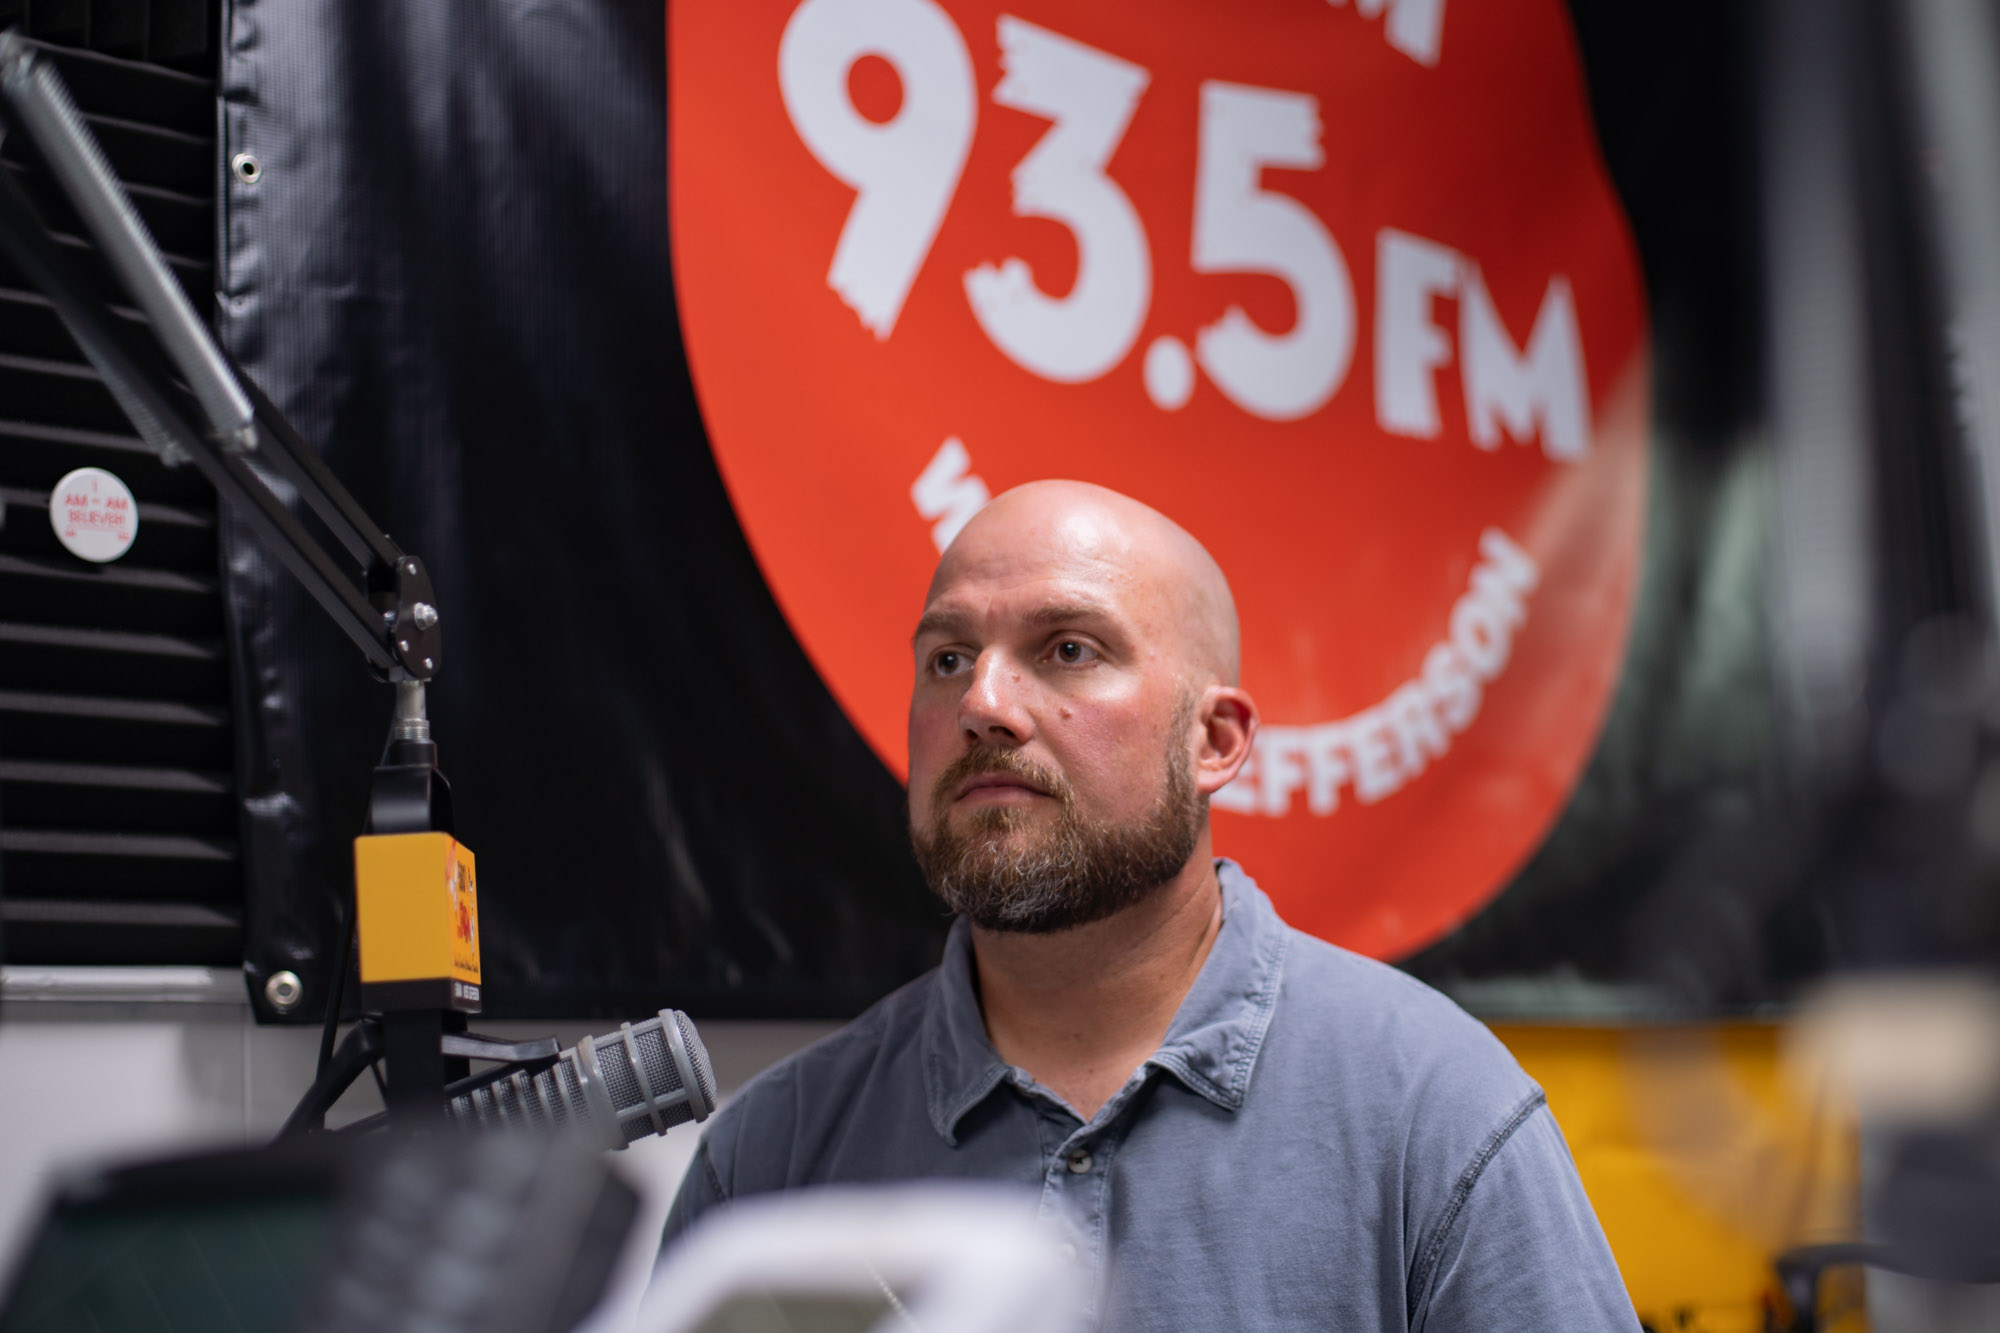 A bald man with a beard sits in front of radio station microphone